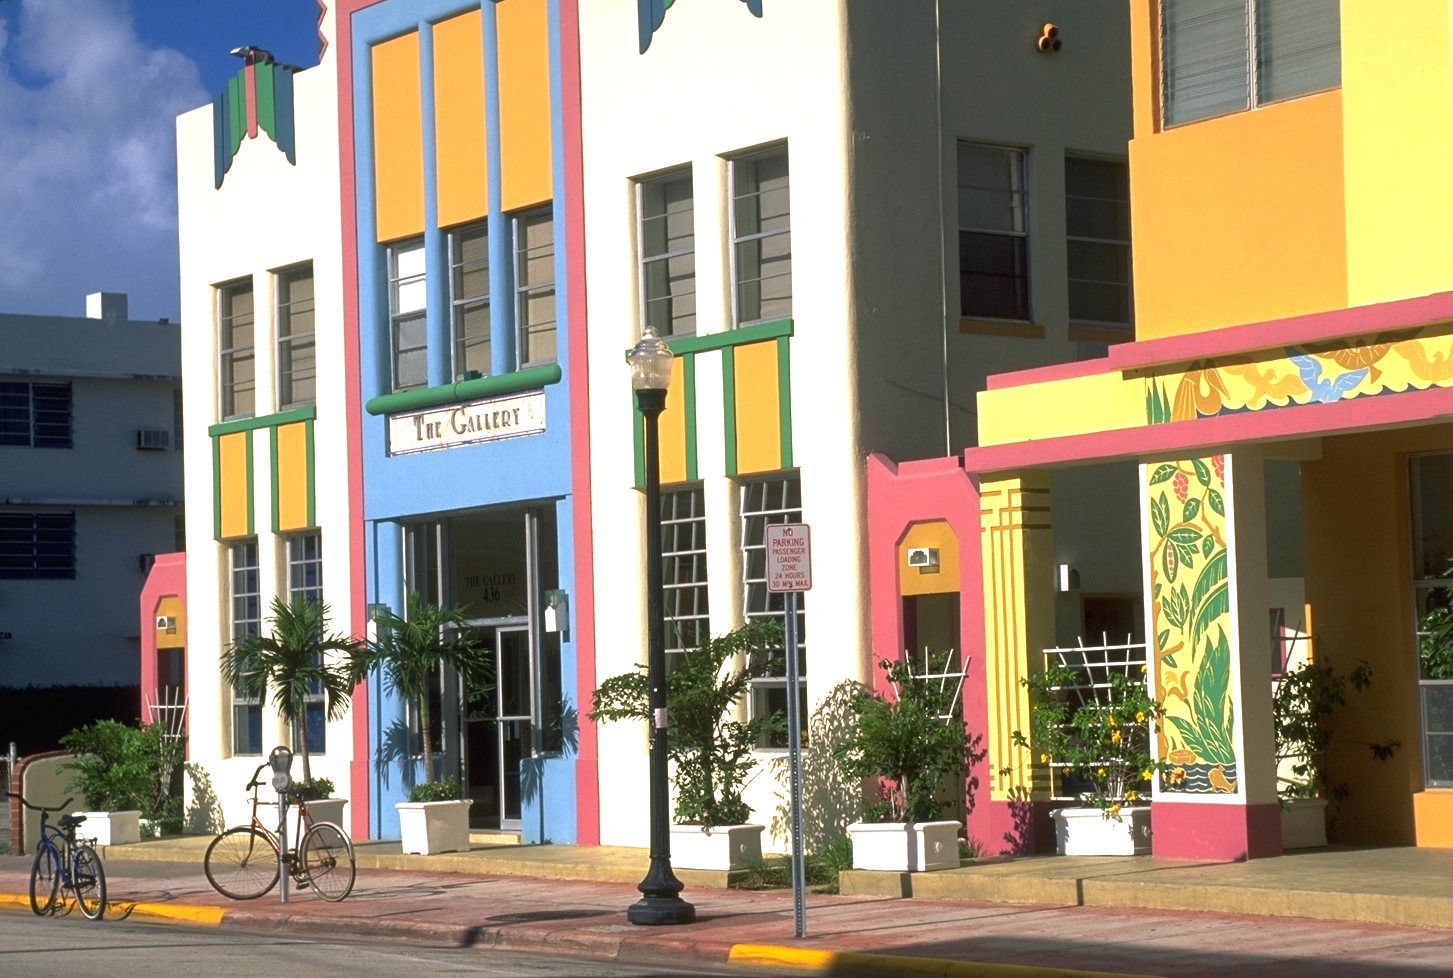 A series of buildings and shops with colorful exterior